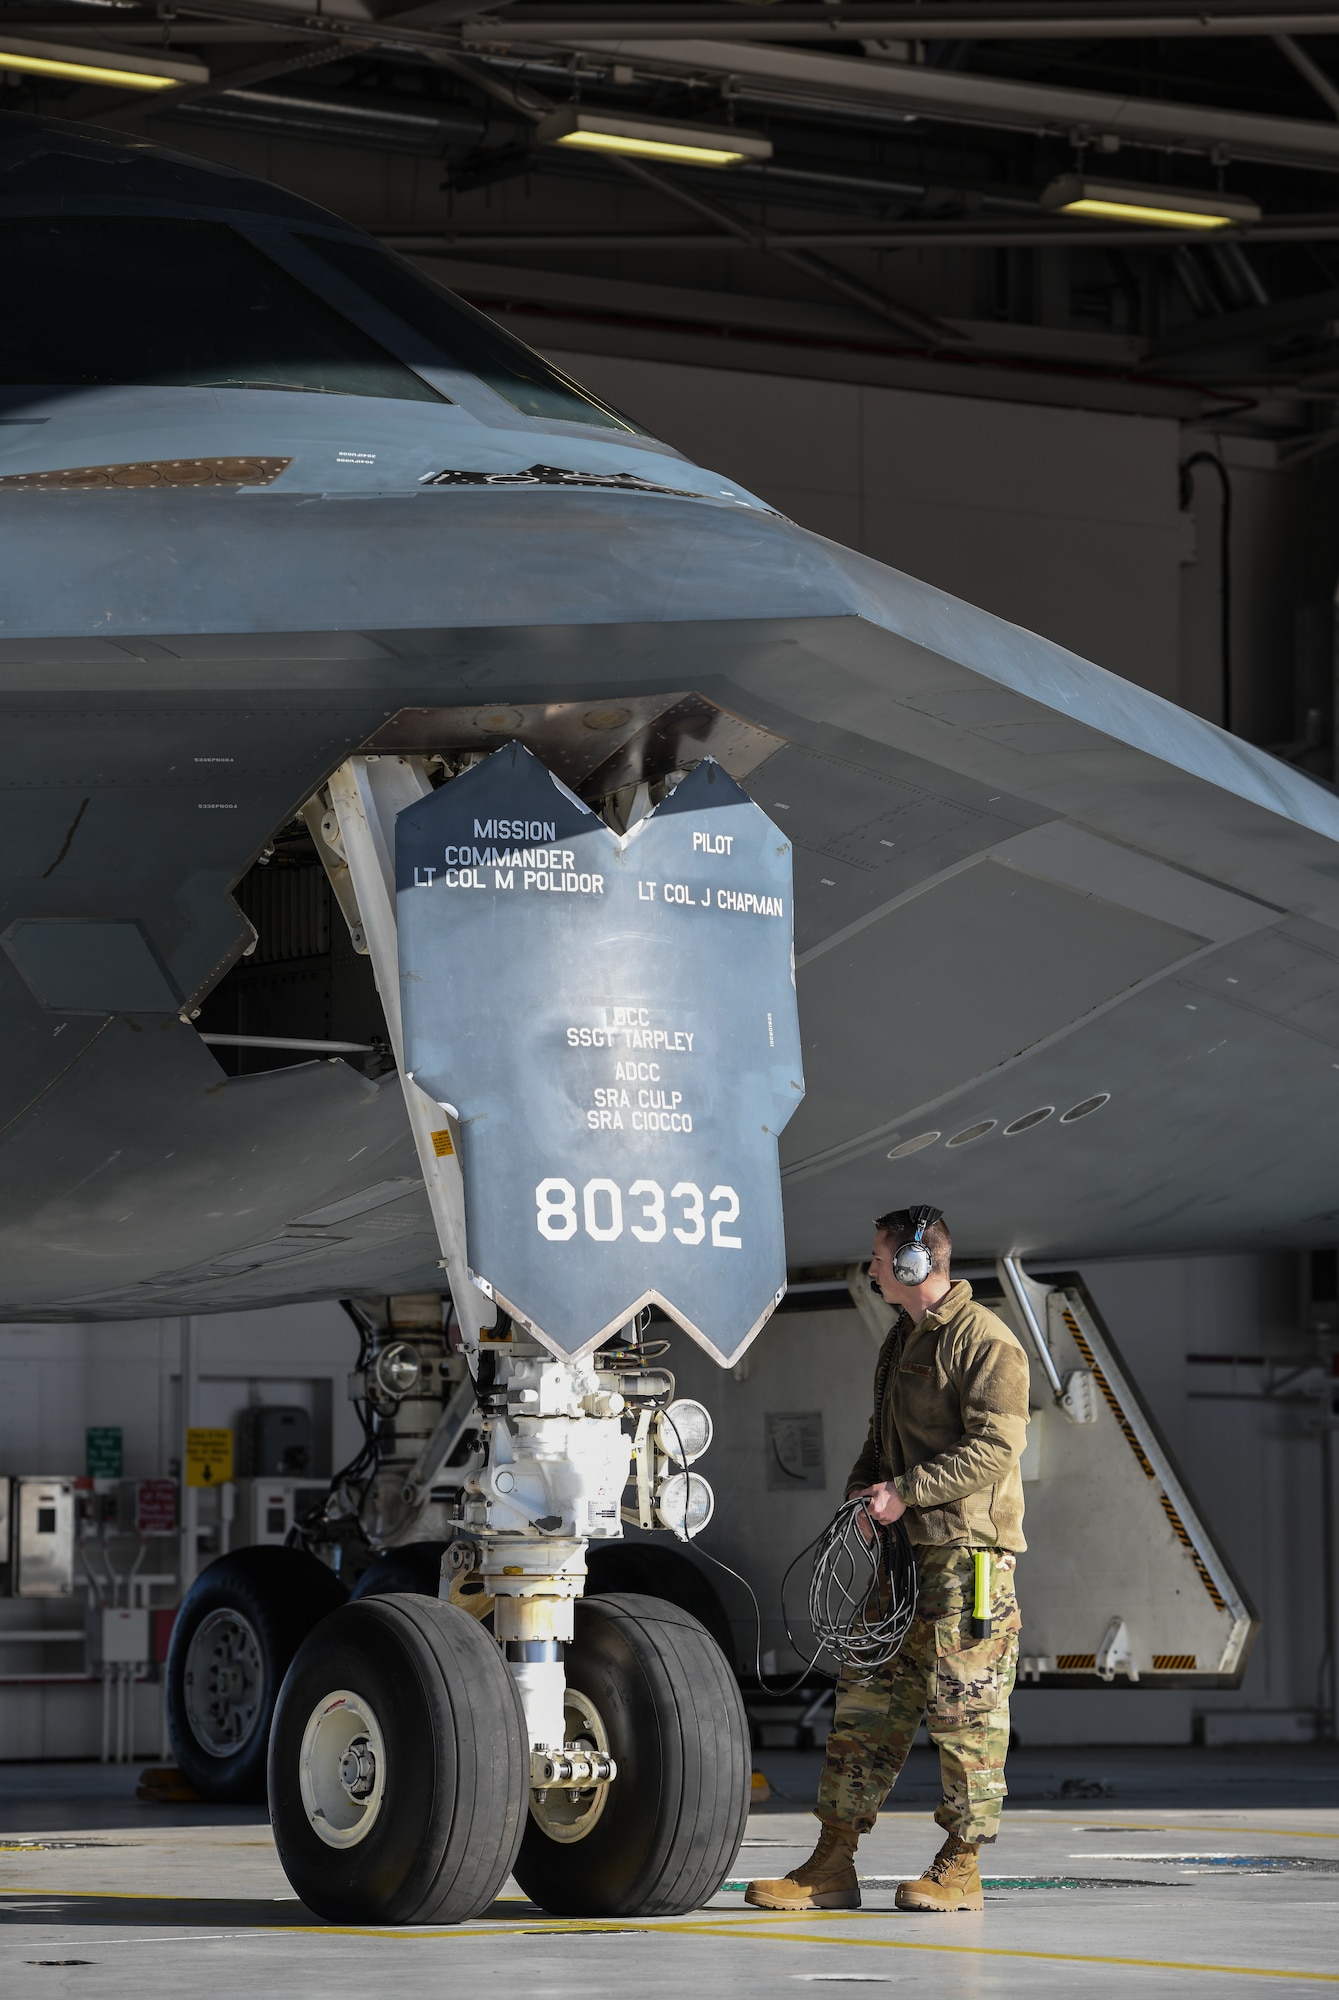 U.S. Air National Guard Tech. Sgt. Justin Aeckerle, a B-2 crew chief assigned to the 131st Maintenance Squadron, readies a B-2 Spirit for flight at Whiteman Air Force Base, Missouri, March 8, 2020. The B-2 took off from Whiteman AFB to support U.S. Strategic Command Bomber Task Force operations in Europe. The 131s Bomb Wing’s 131st MXS is the total-force partner unit to the 509th Bomb Wing. (U.S. Air Force photo by Tech. Sgt. Alexander W. Riedel)